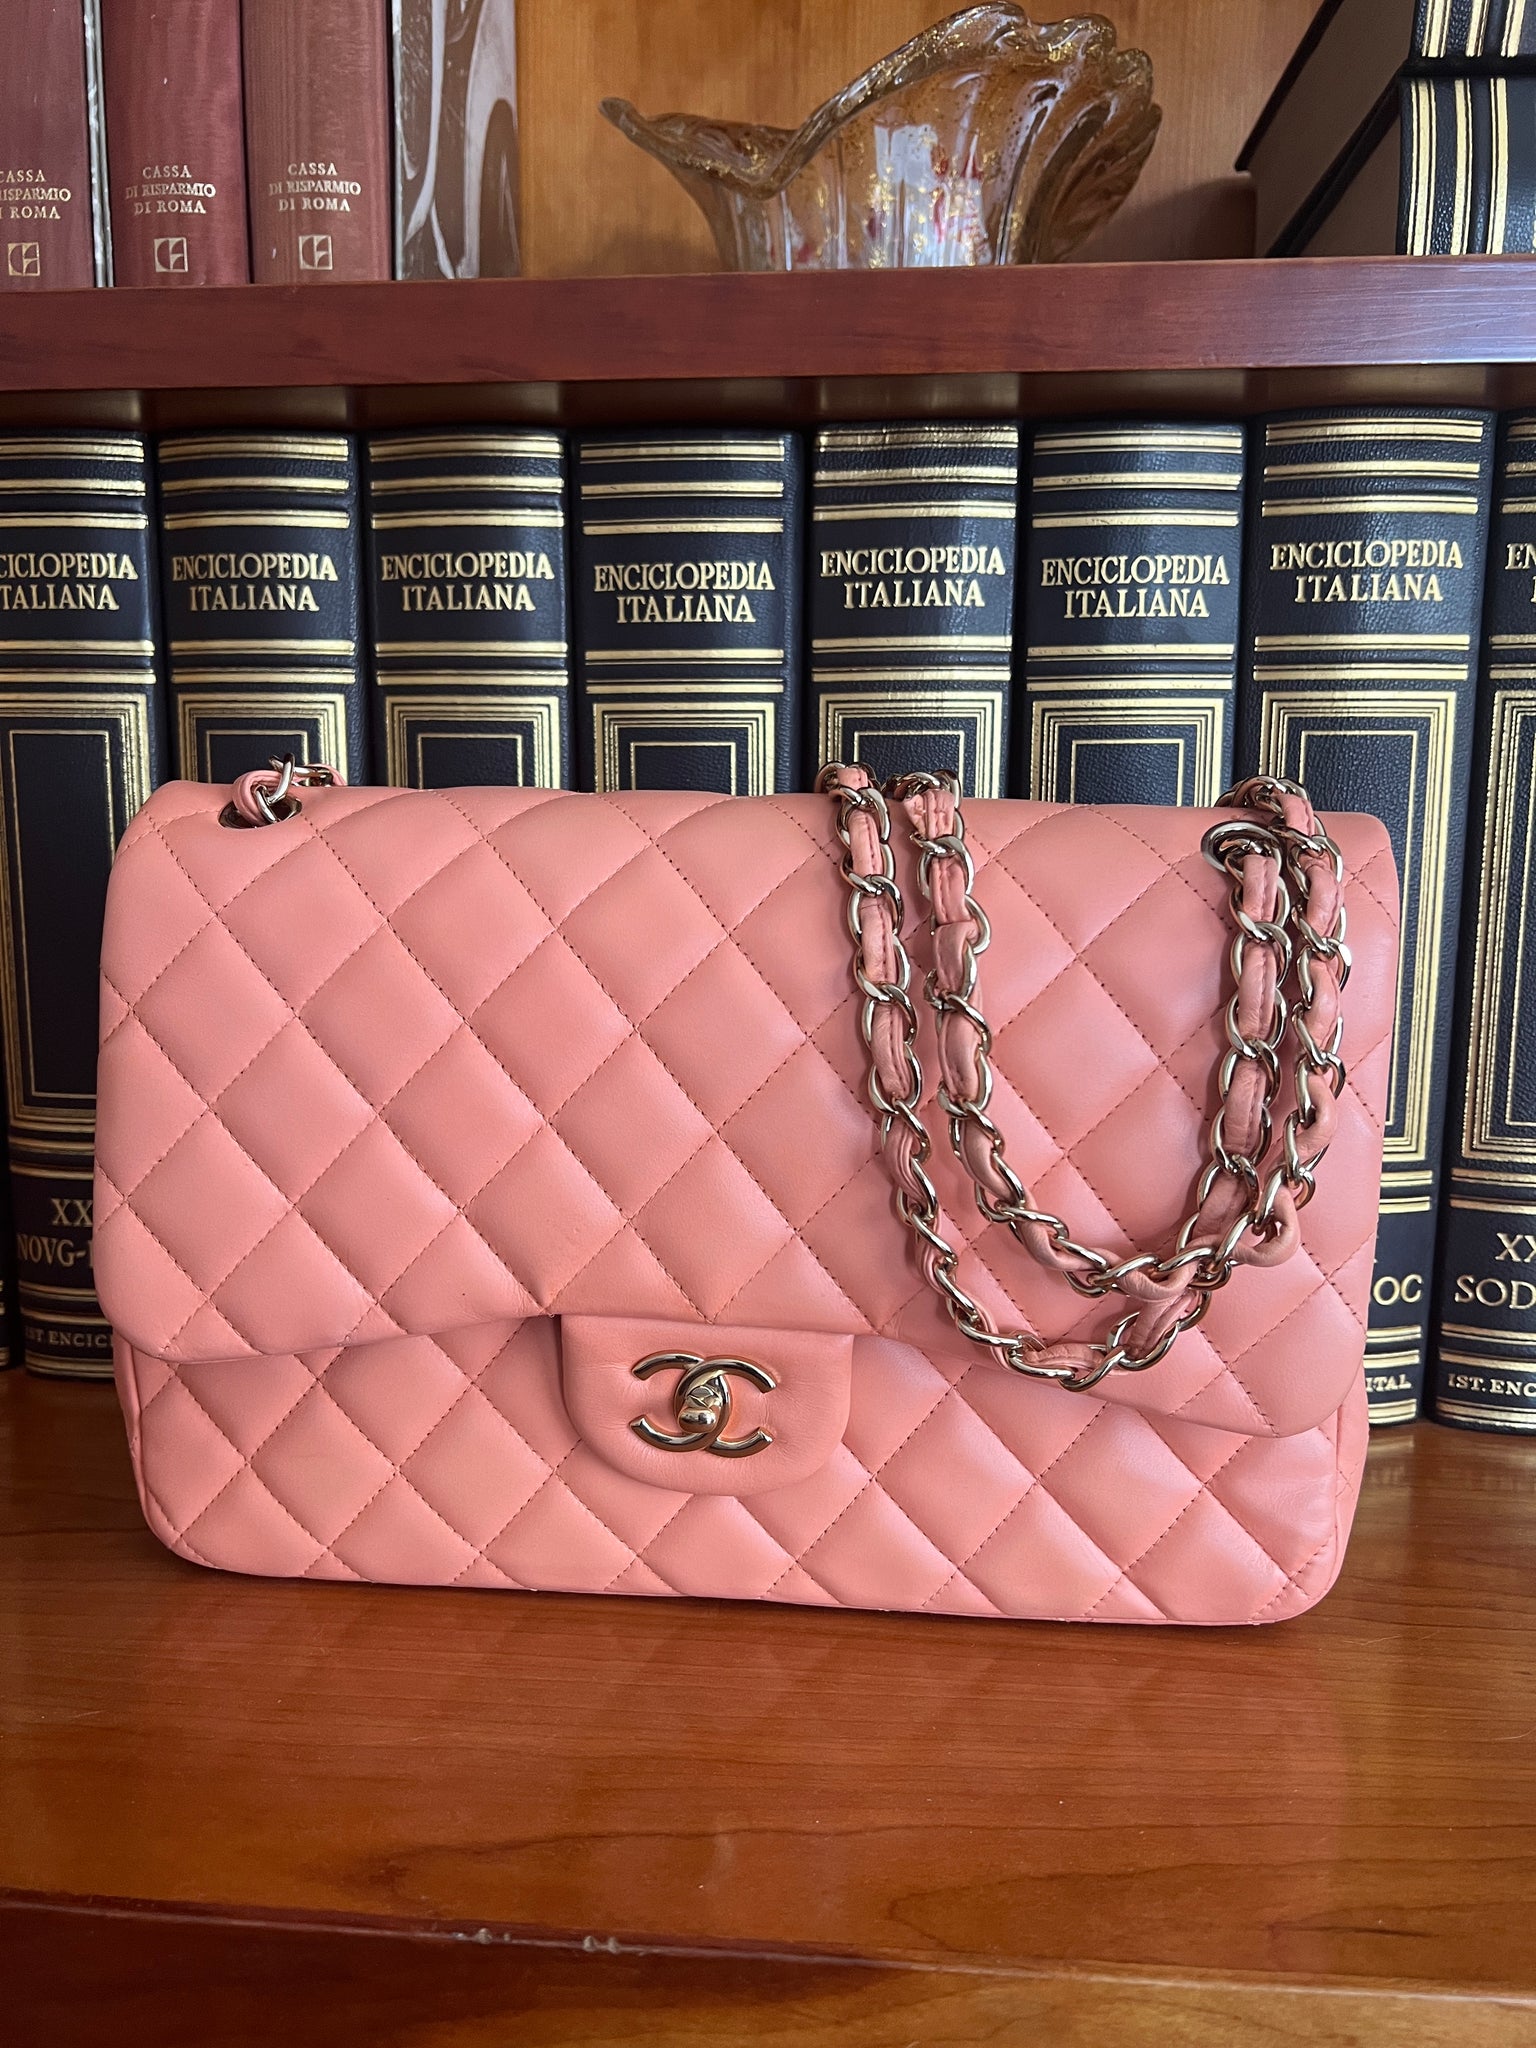 Hot Pink Chanel Classic Jumbo Flap  Red leather handbags, Chanel handbags,  Chanel handbags classic